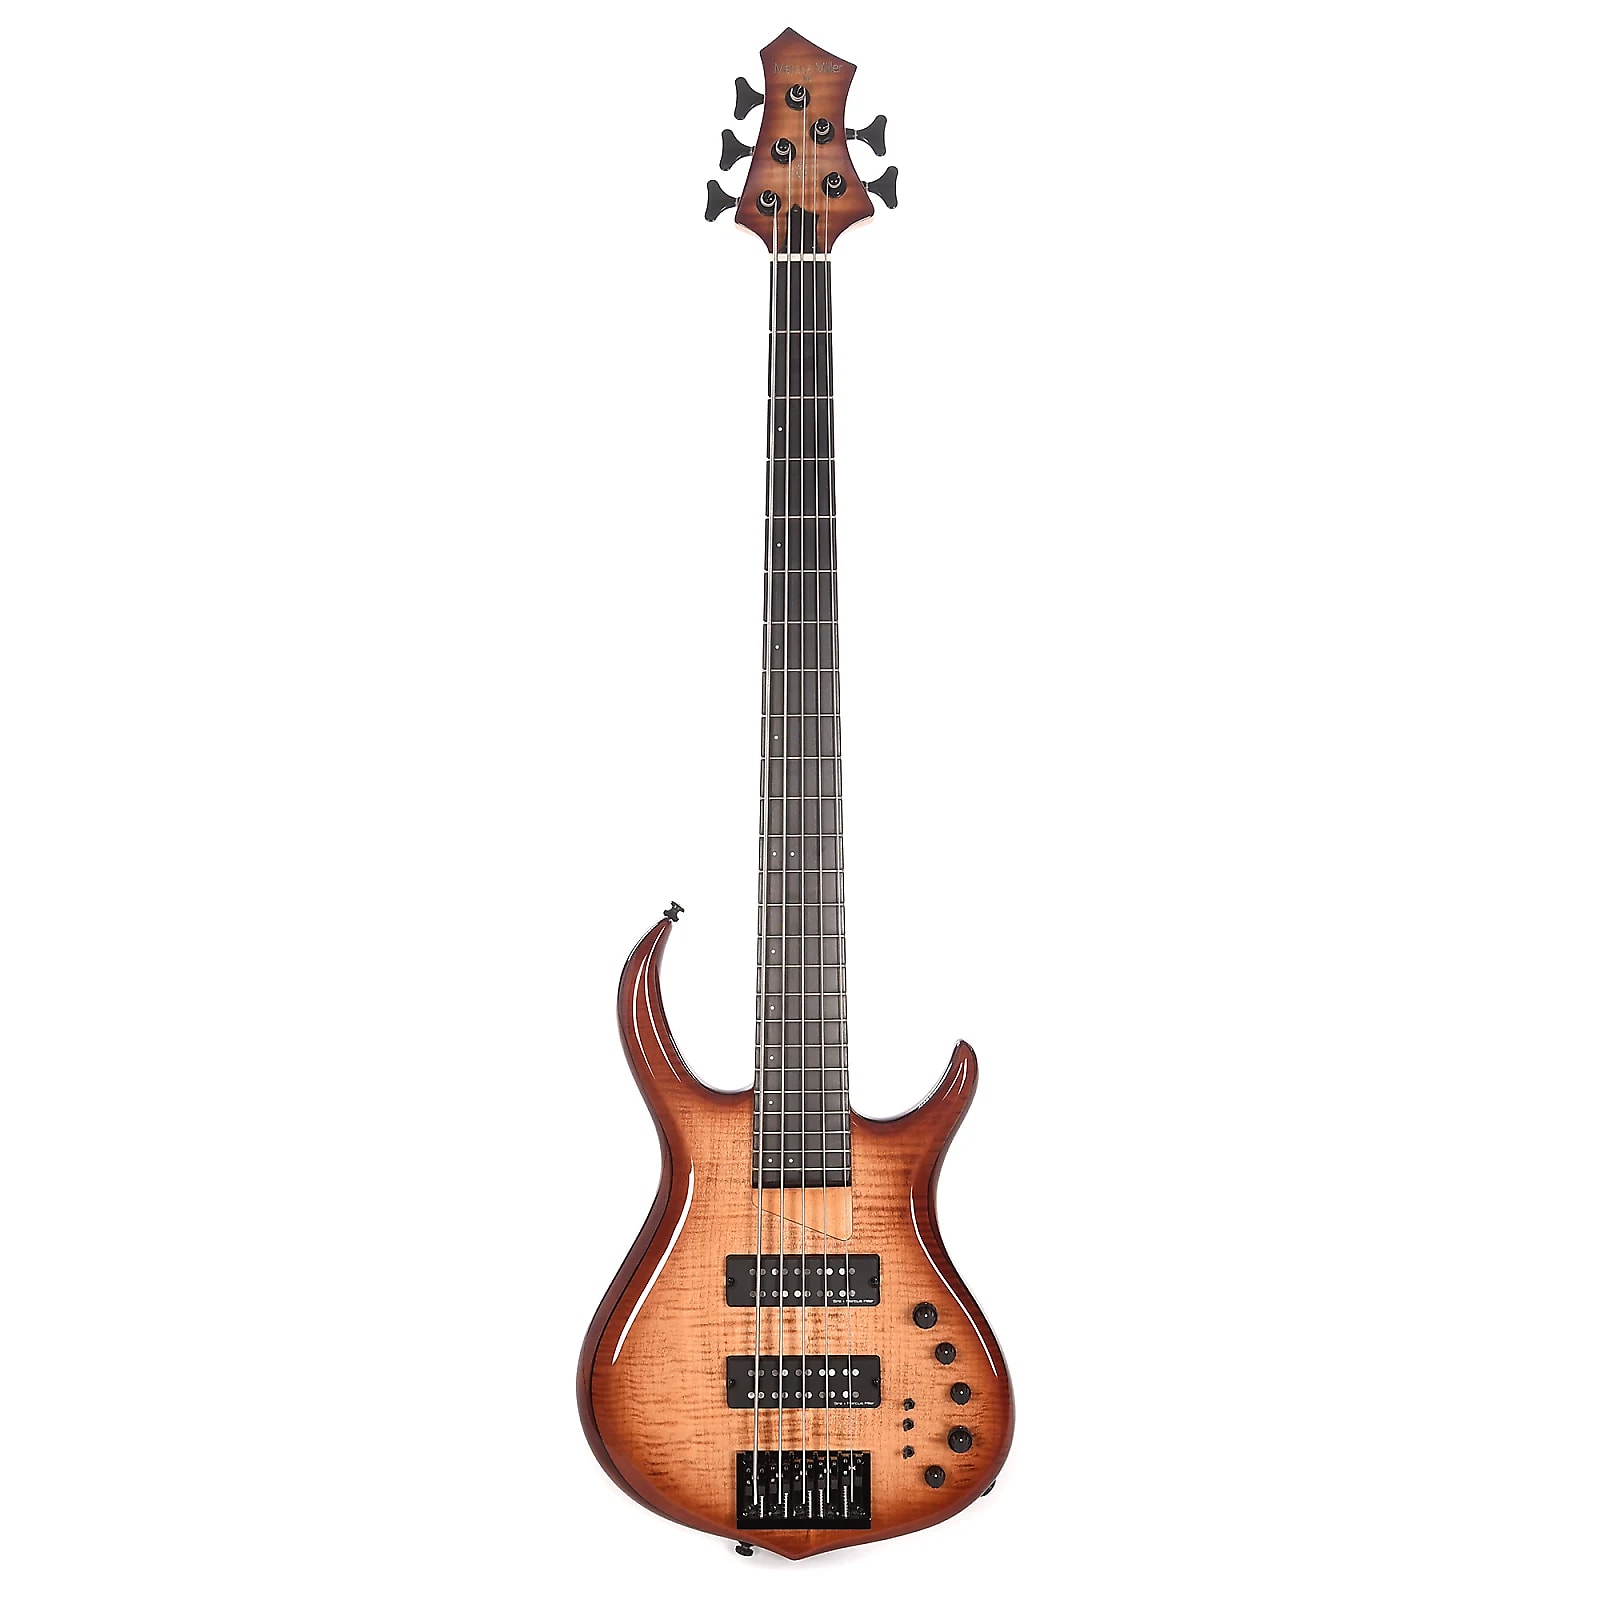 Sire 2nd Generation Marcus Miller M7 5-String